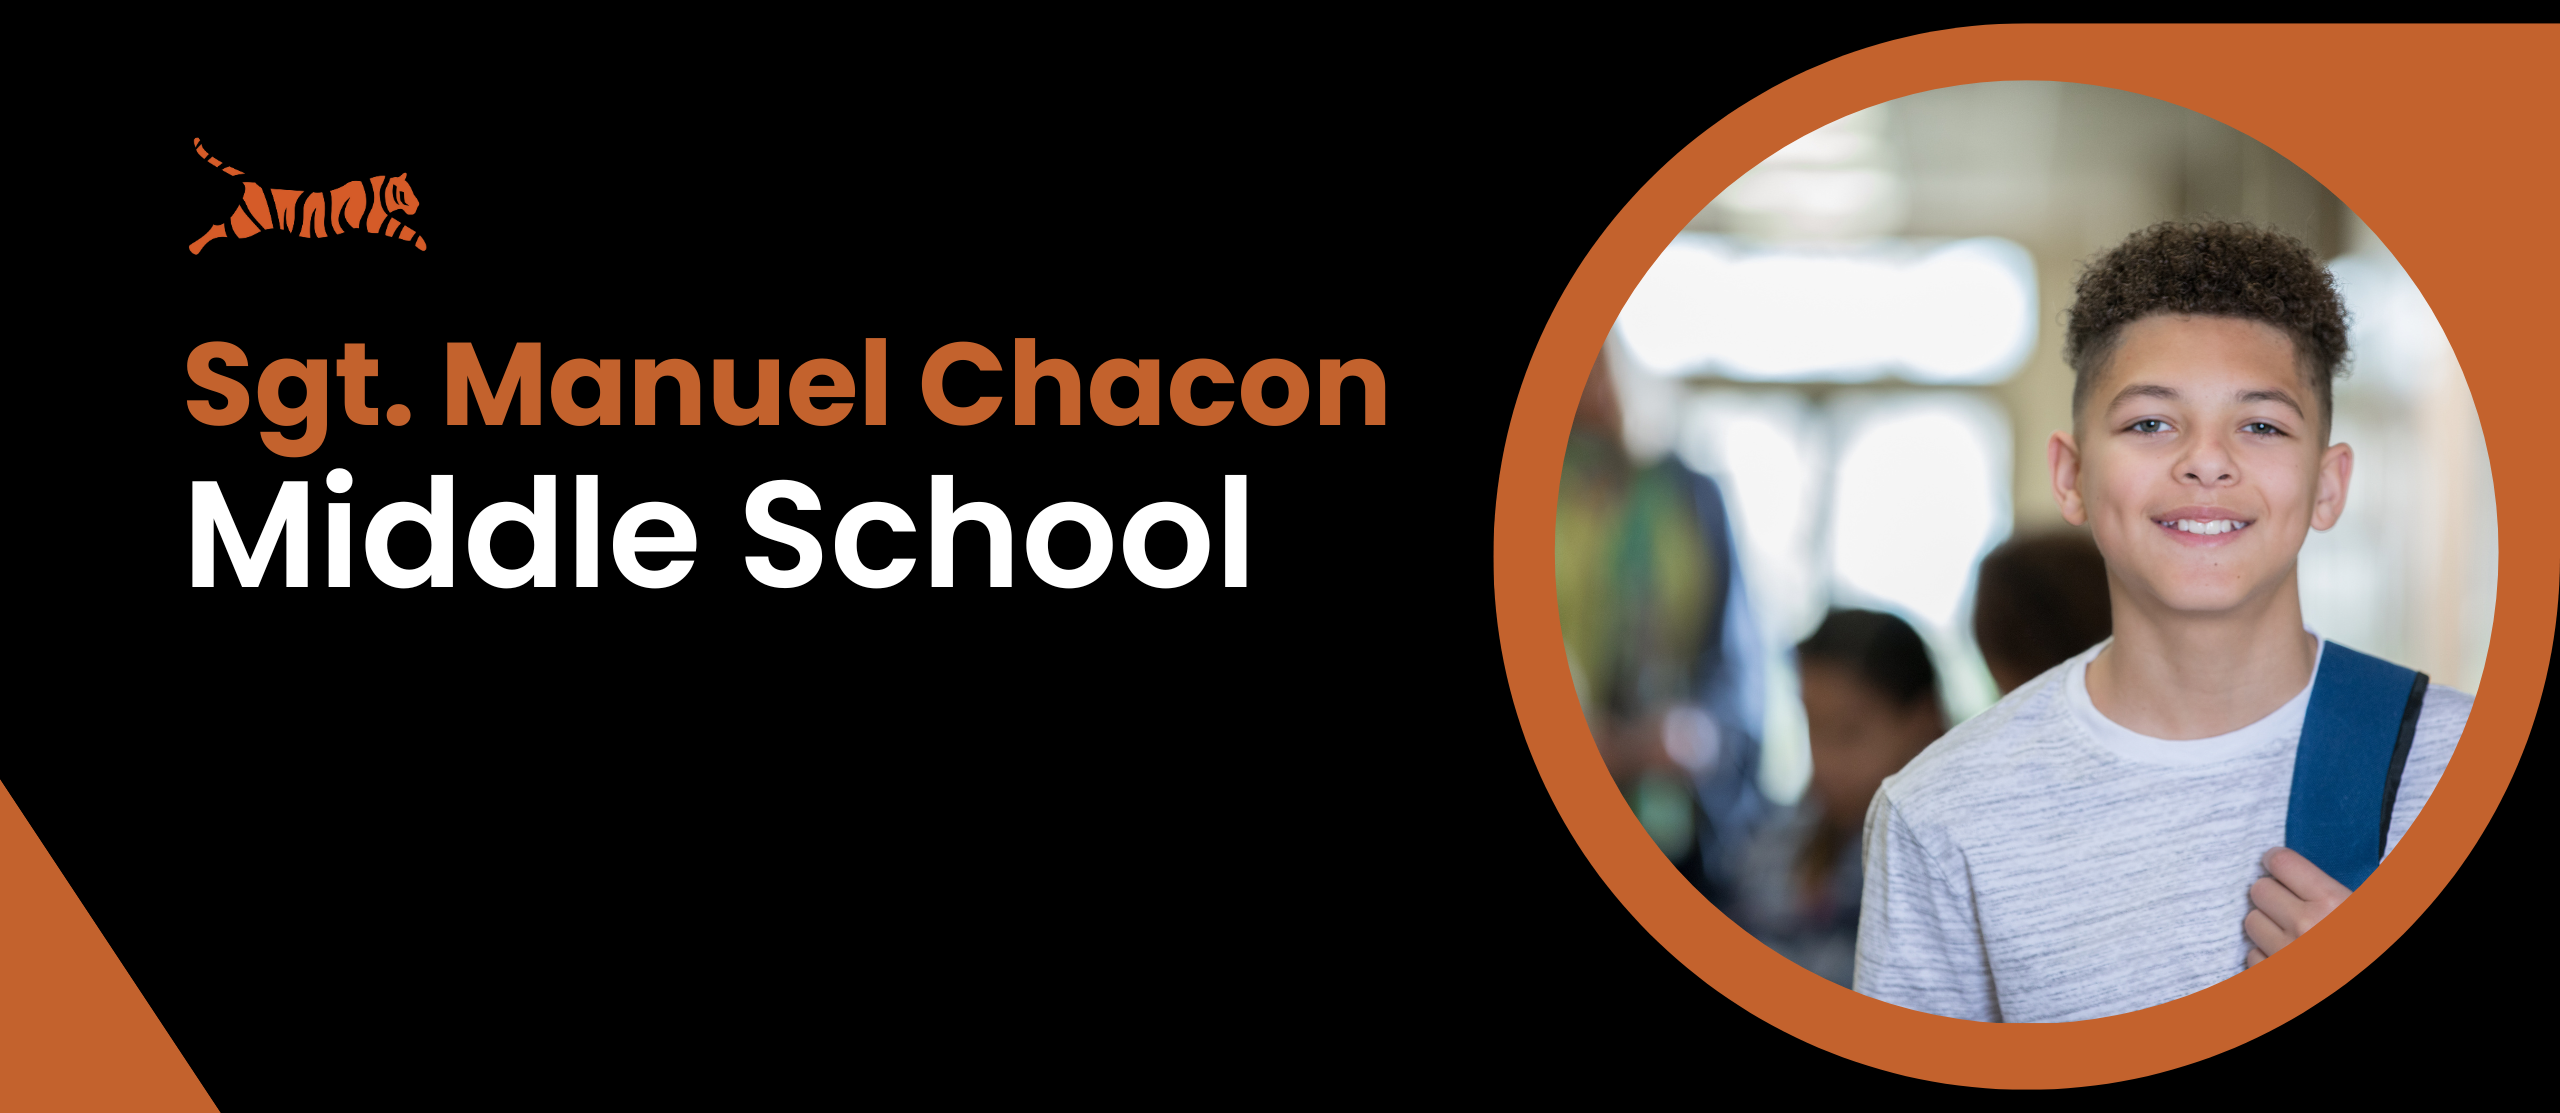 Chacon Middle School